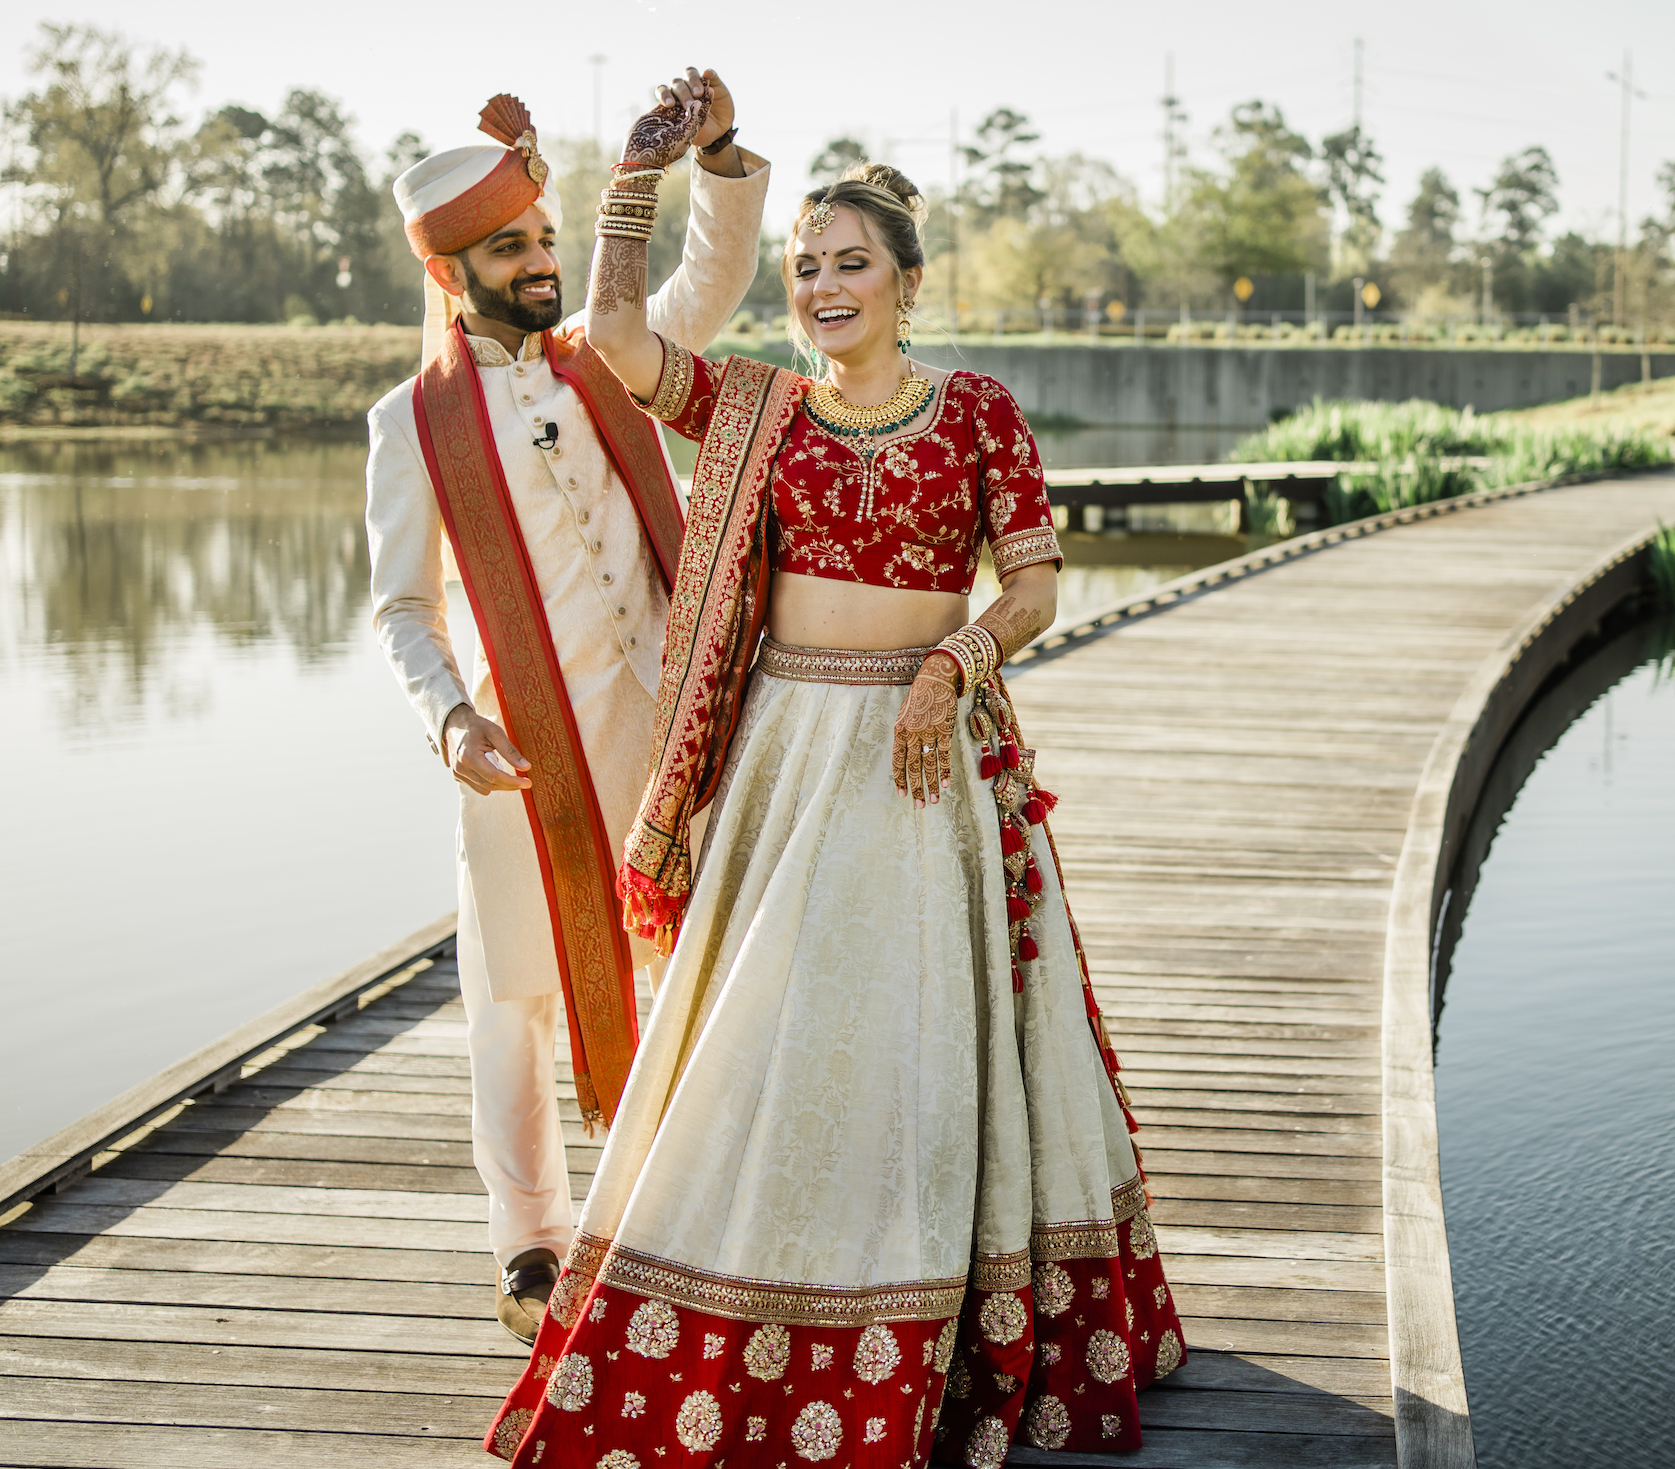 The bride and groom wearing traditional Indian wedding attire dance outside their wedding venue. 